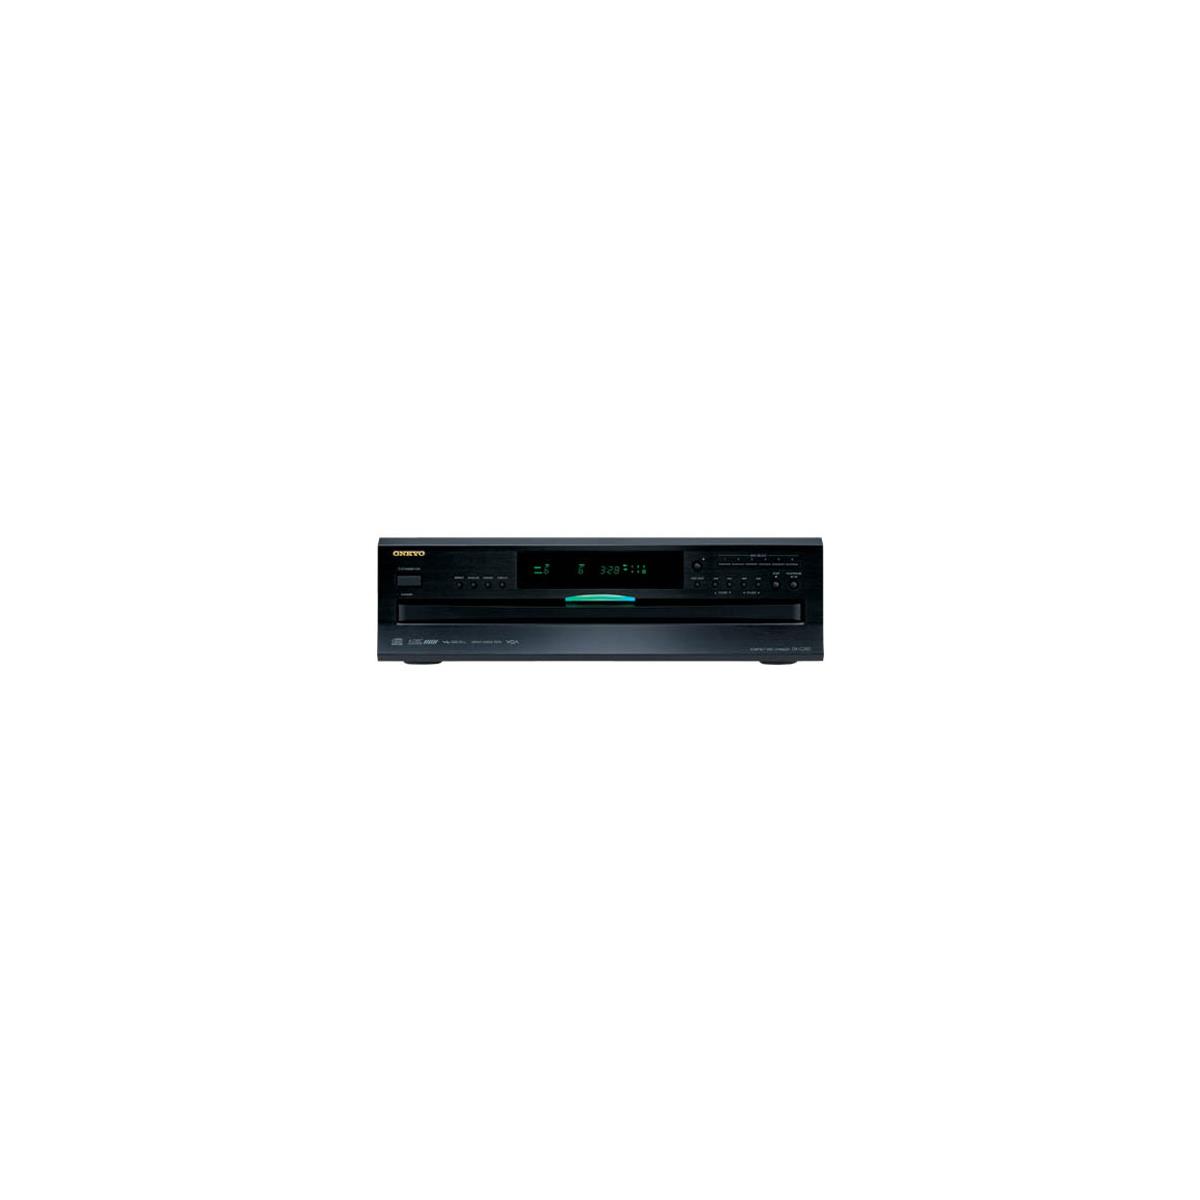 Image of Onkyo DX-C390 6-Disc CD Carousel Changer with MP3 CD Playback